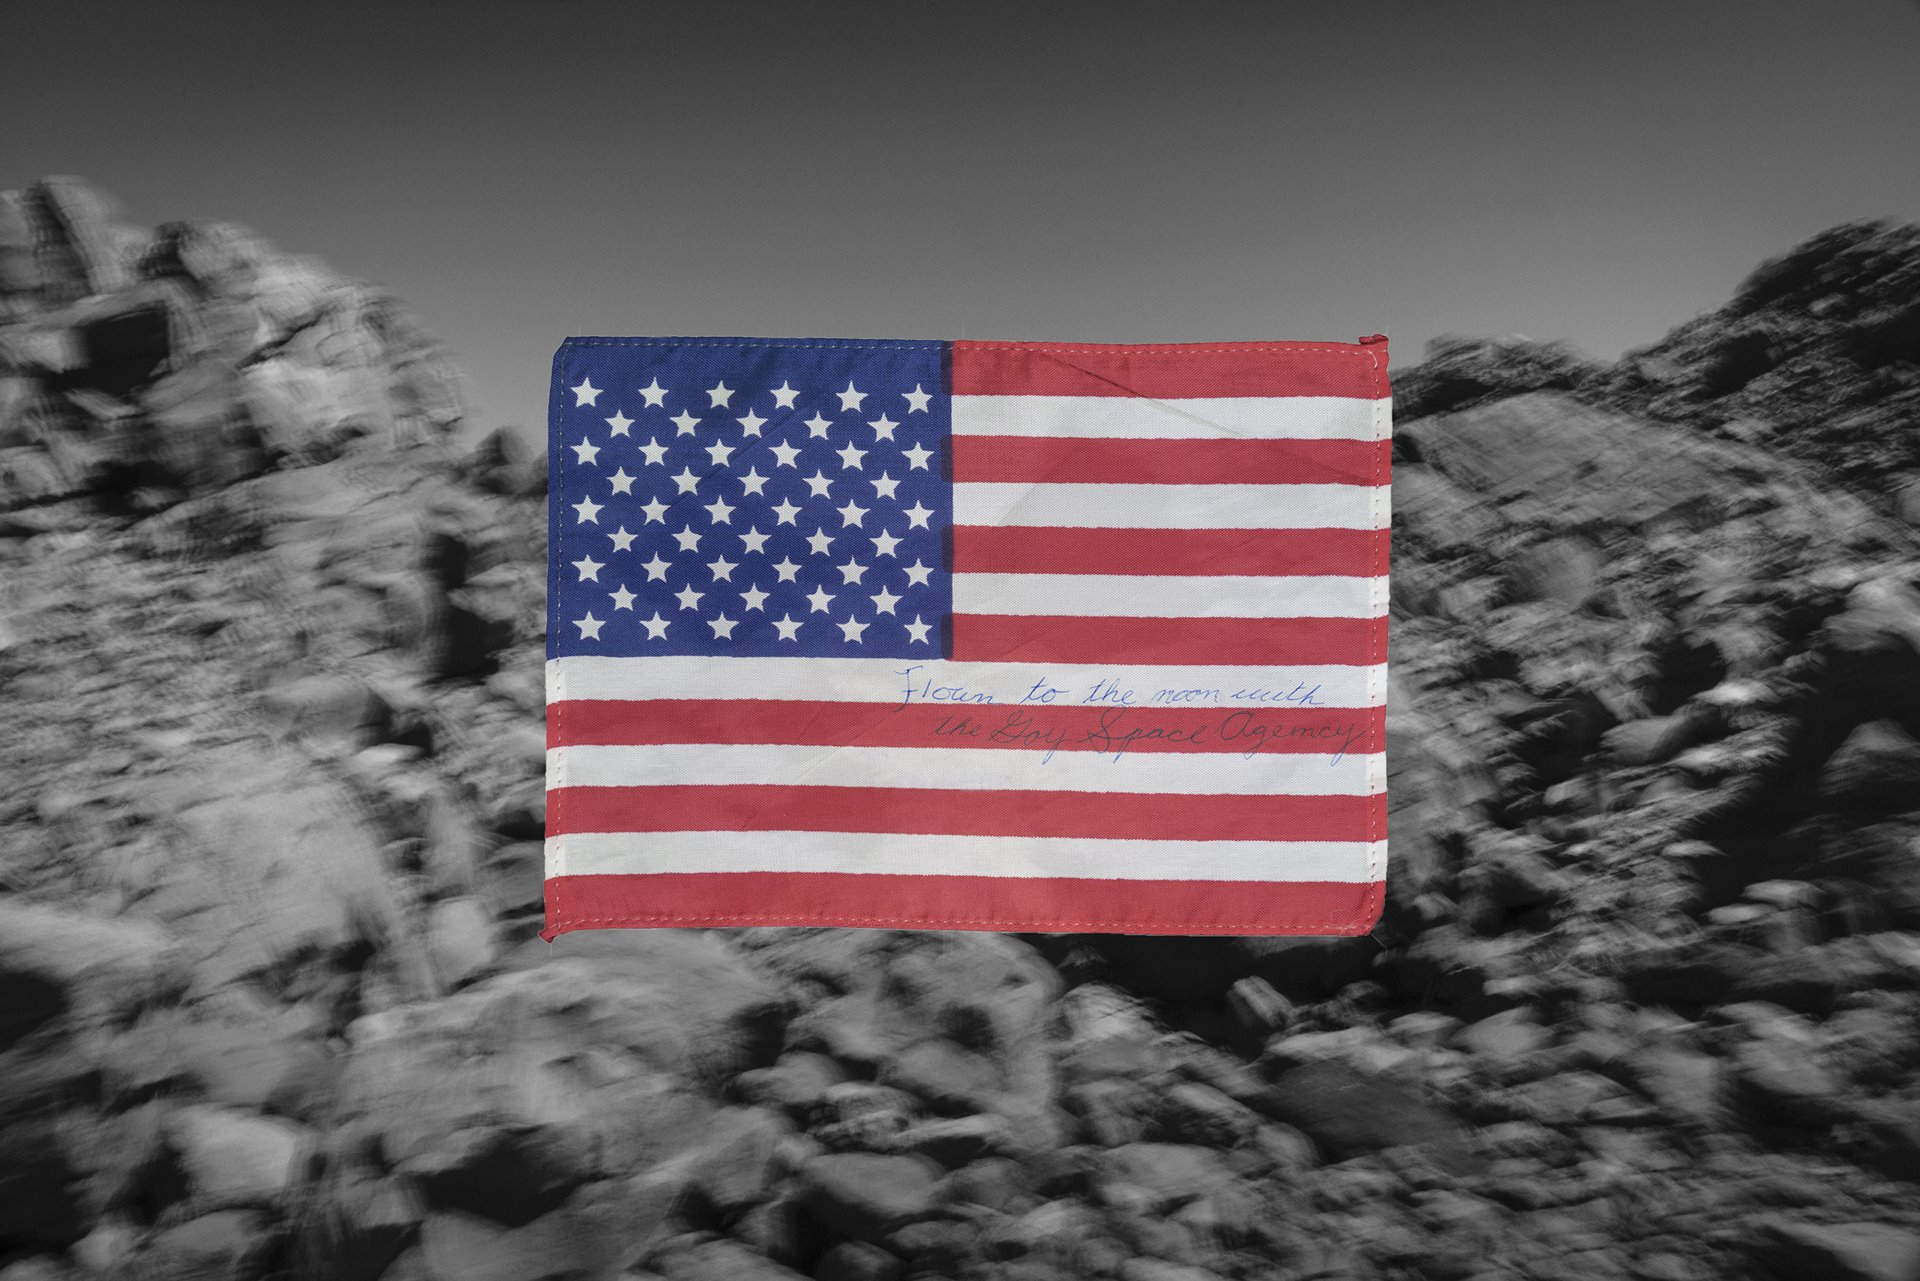 The photographer reimagines the American flag that Buzz Aldrin flew to the moon on Apollo 11 in 1969 as a flag taken instead by the fictional Gay Space Agency.